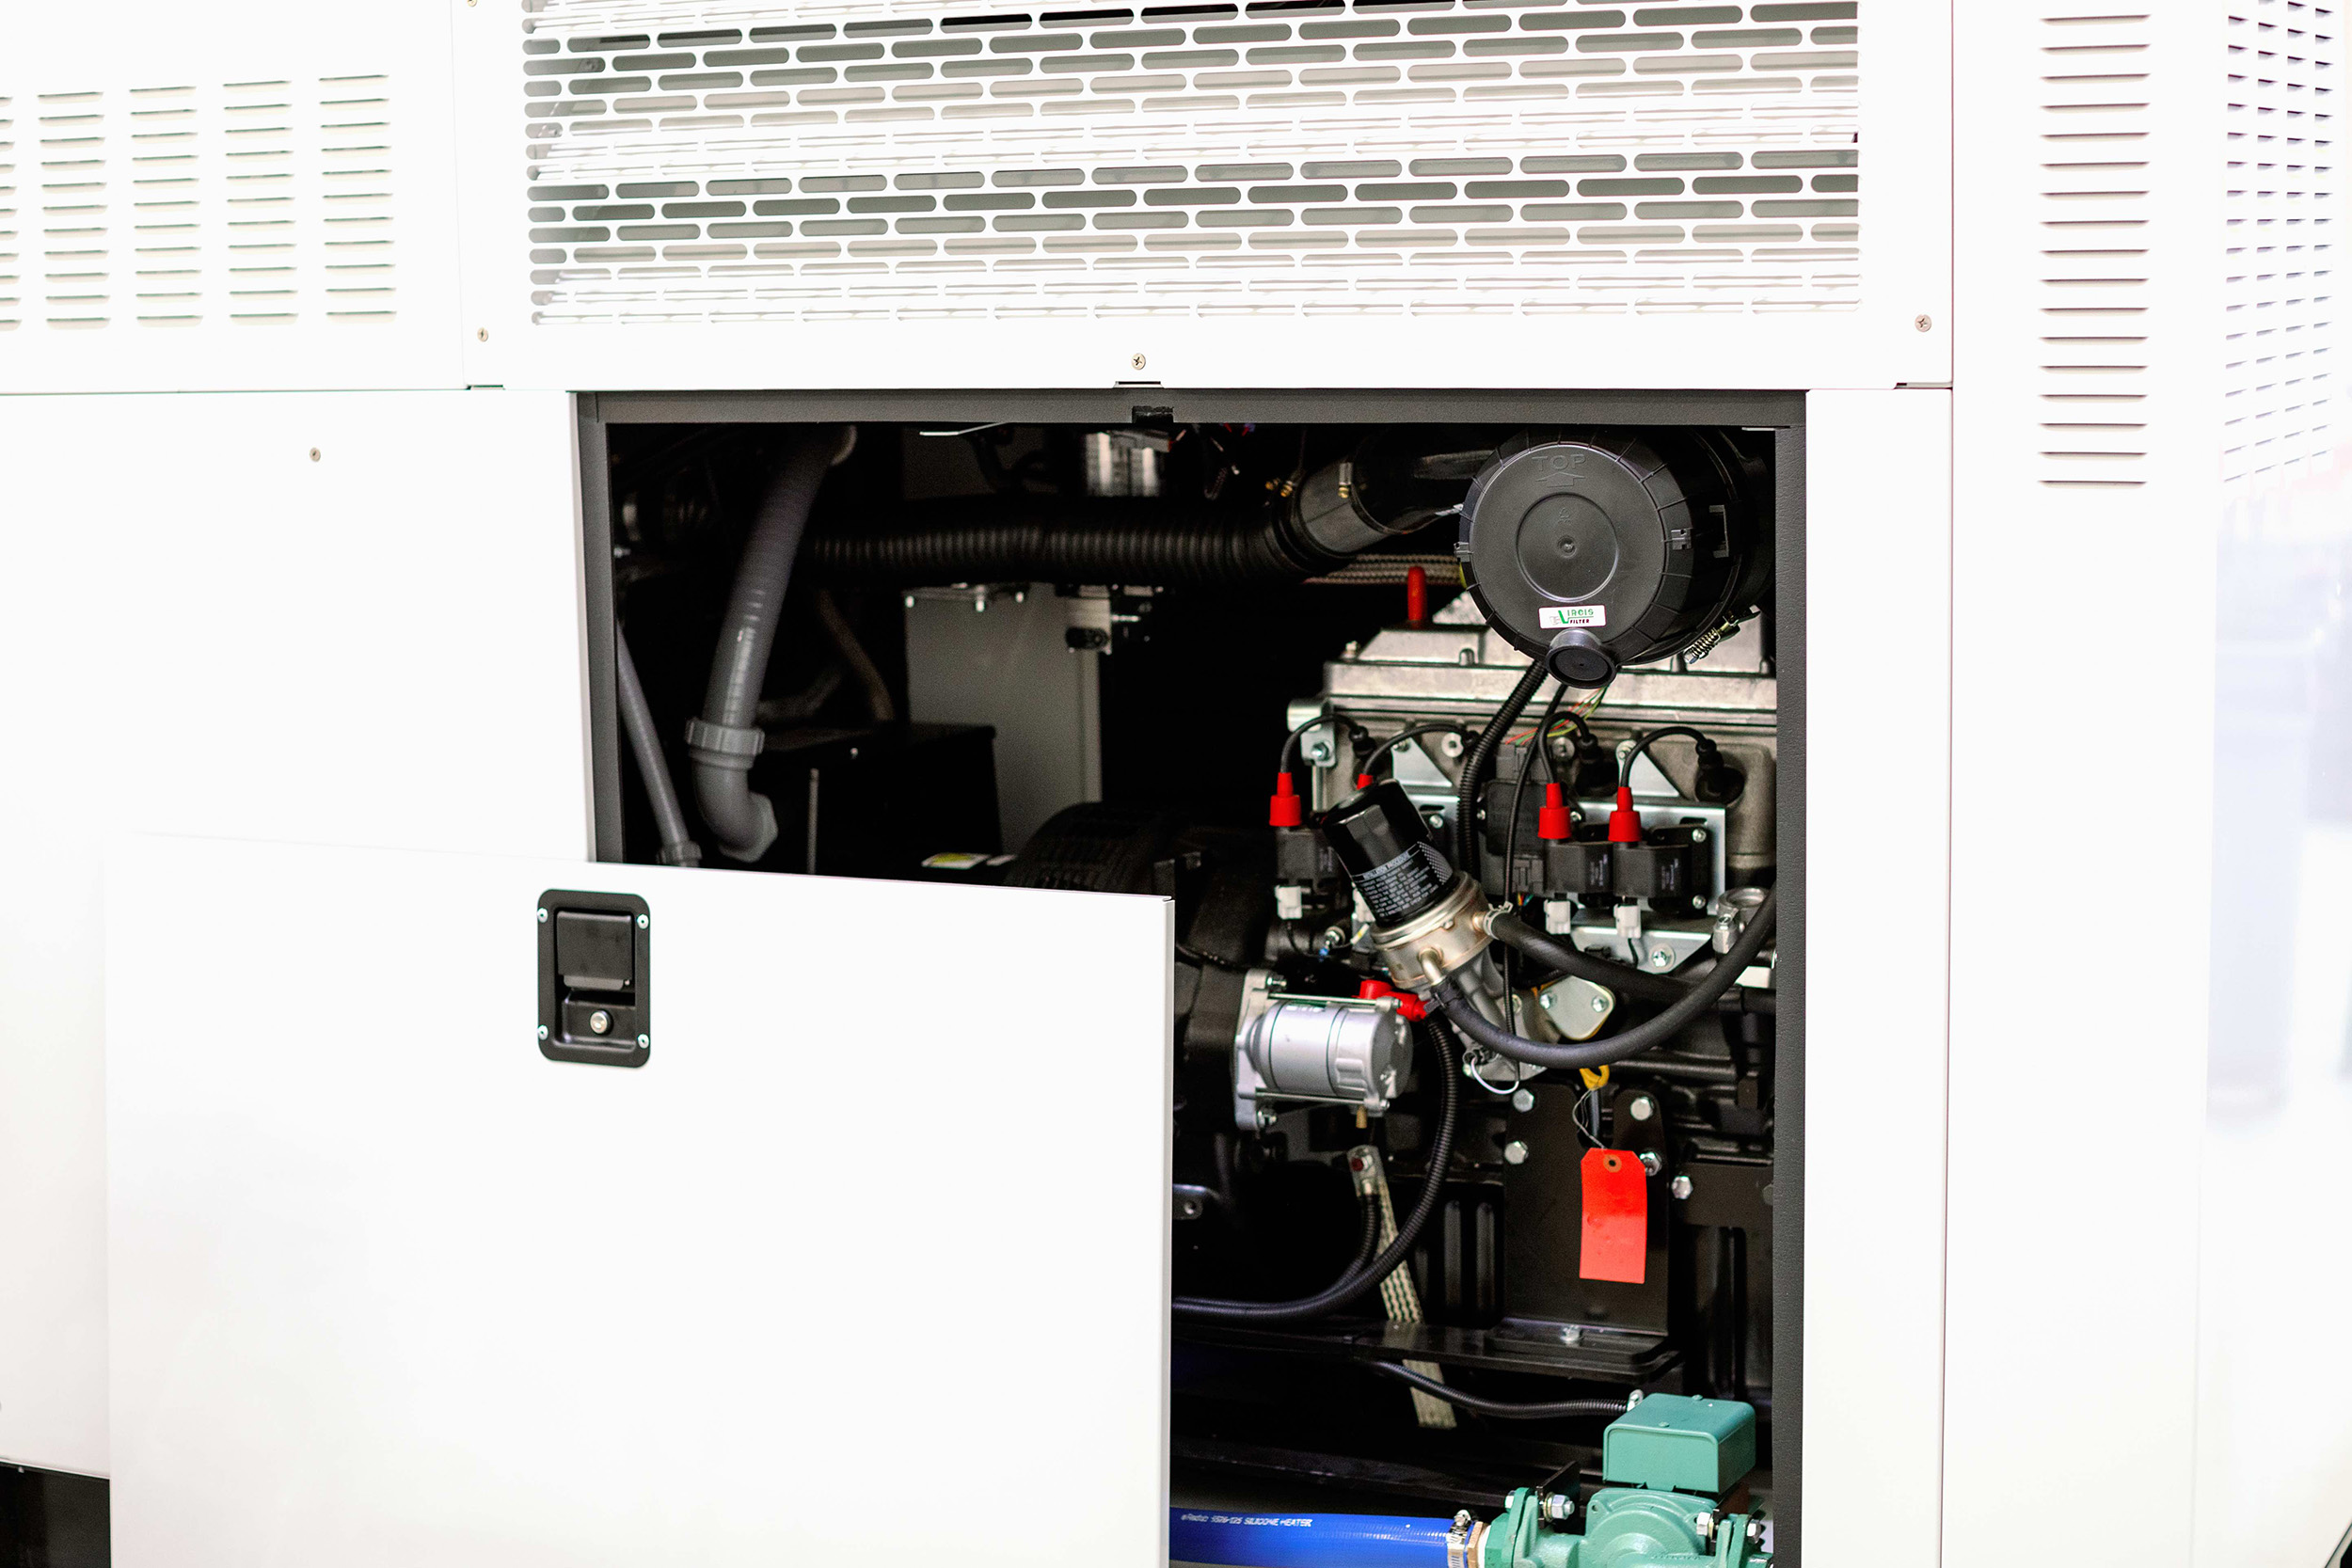 Look inside the PowerPlant H24 micro-CHP unit at its engine.